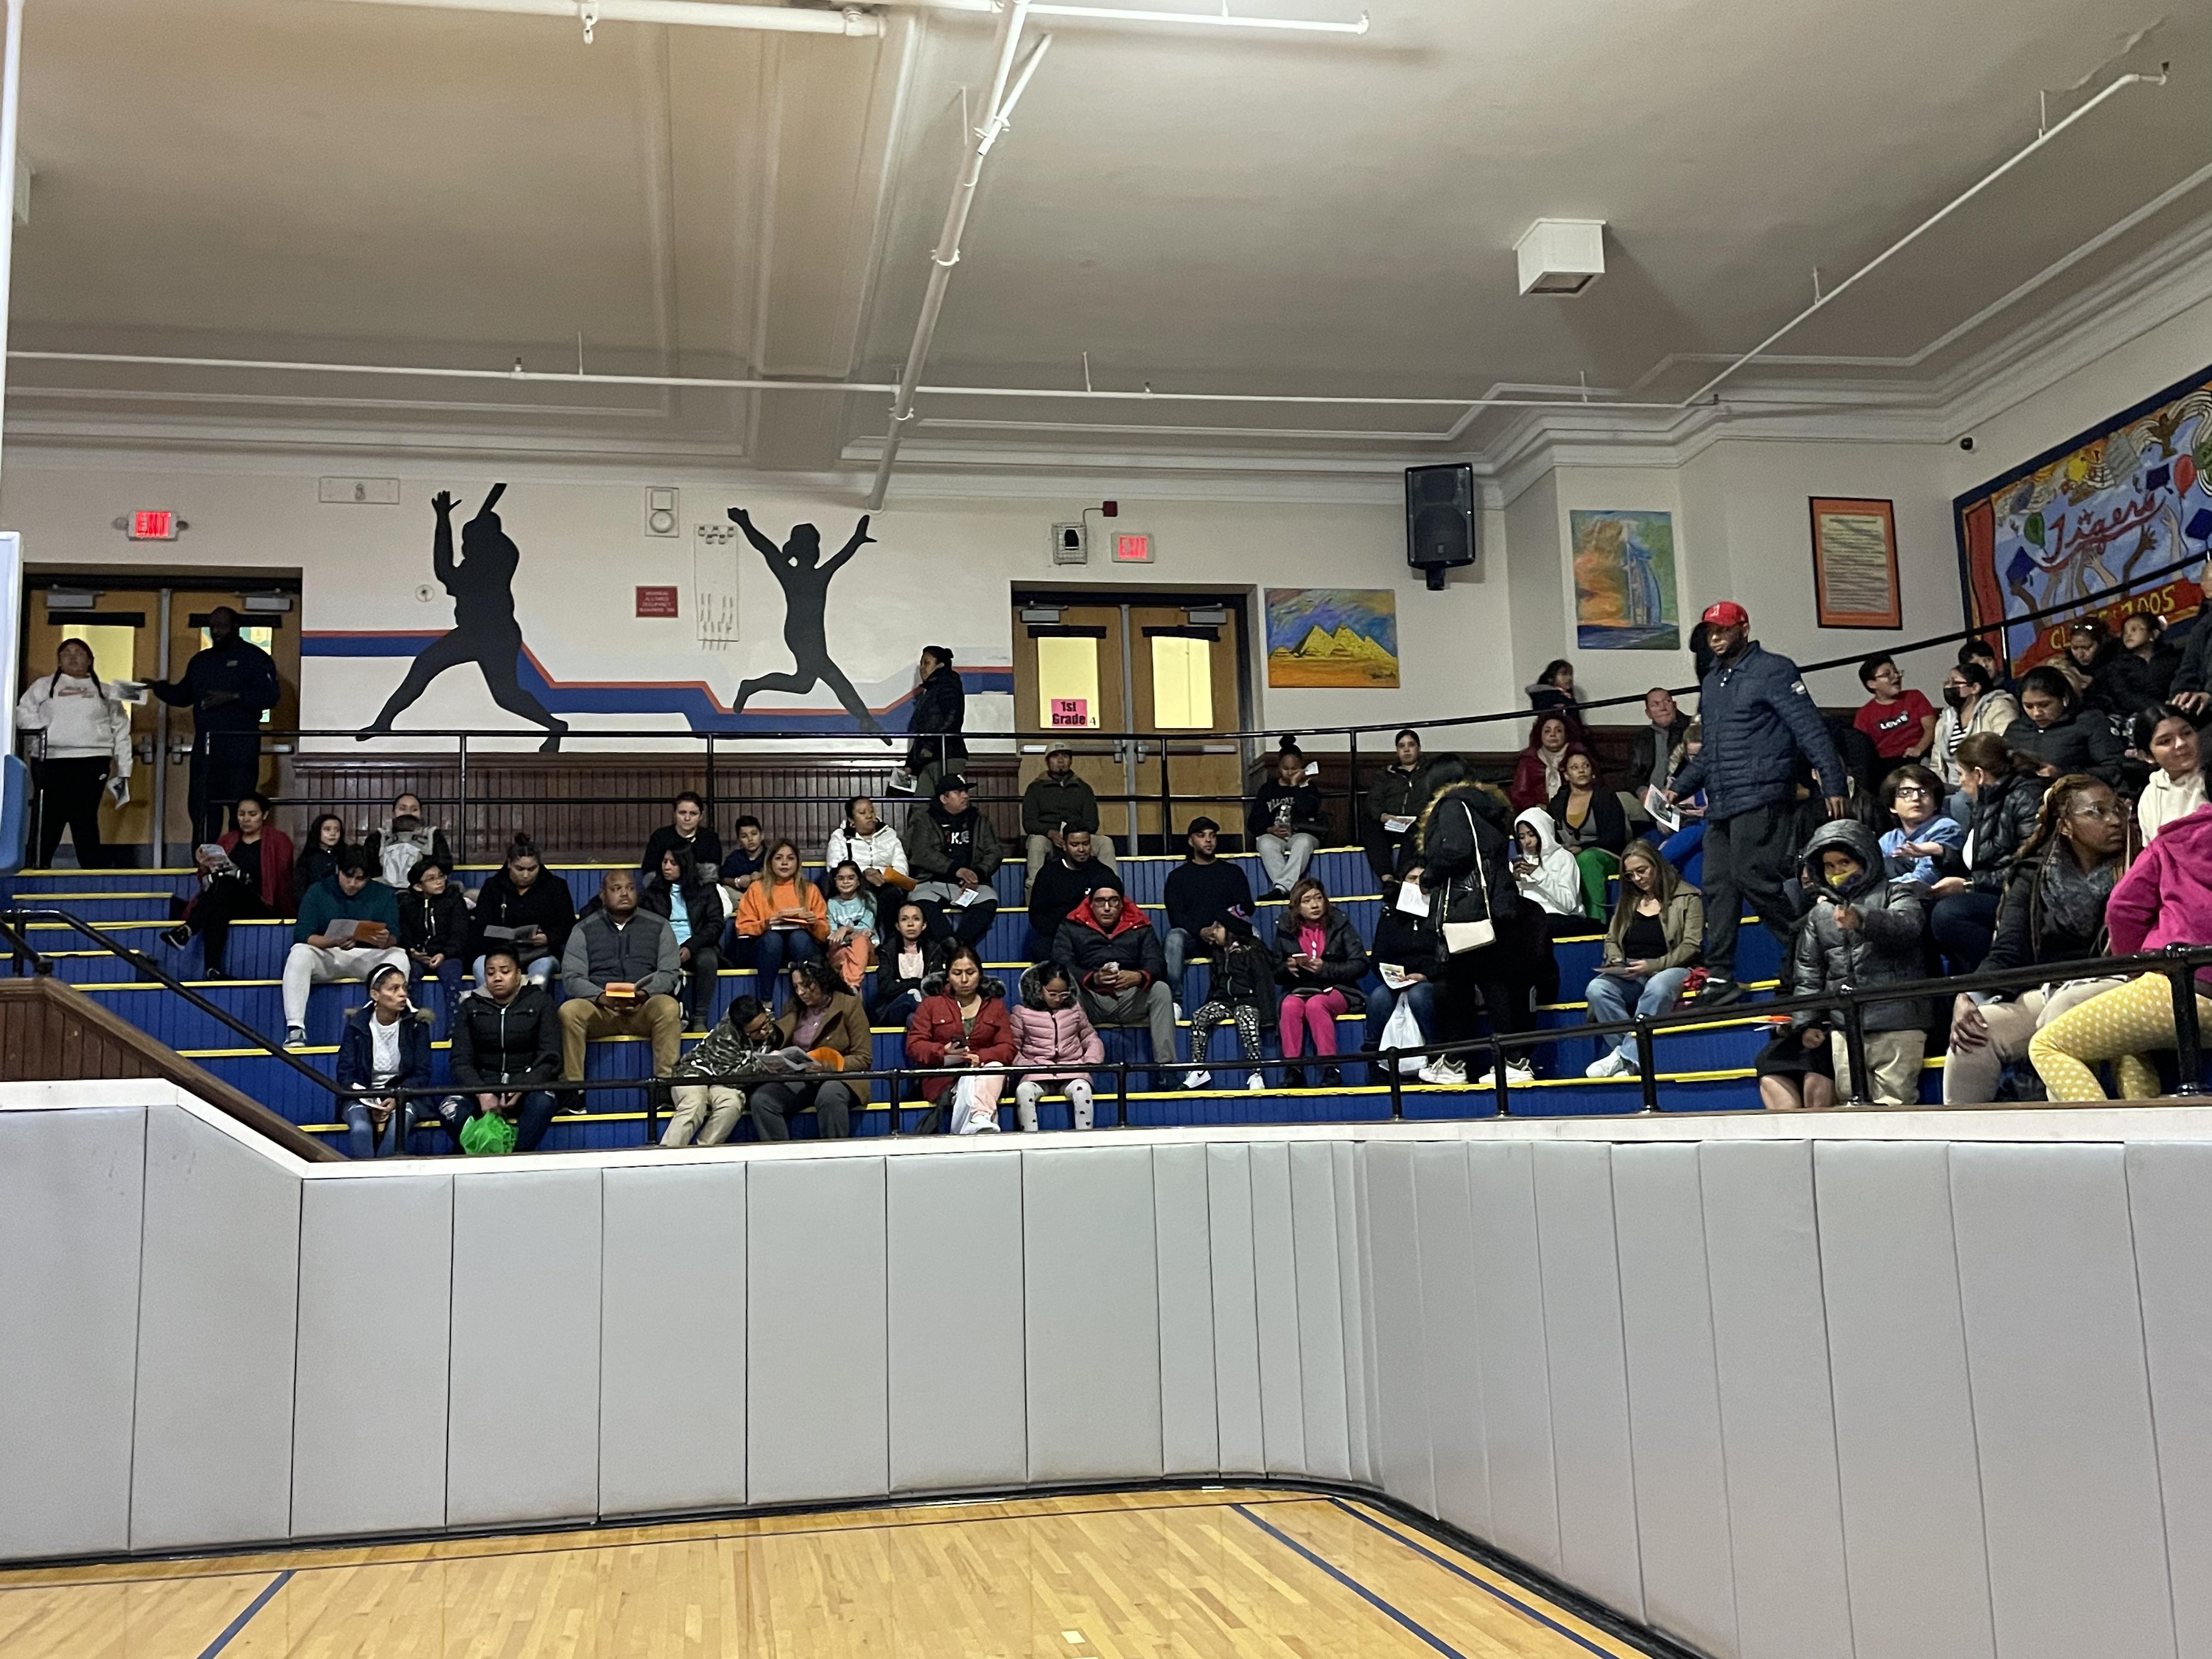 Students and Parents in the Washington School Gymnasium